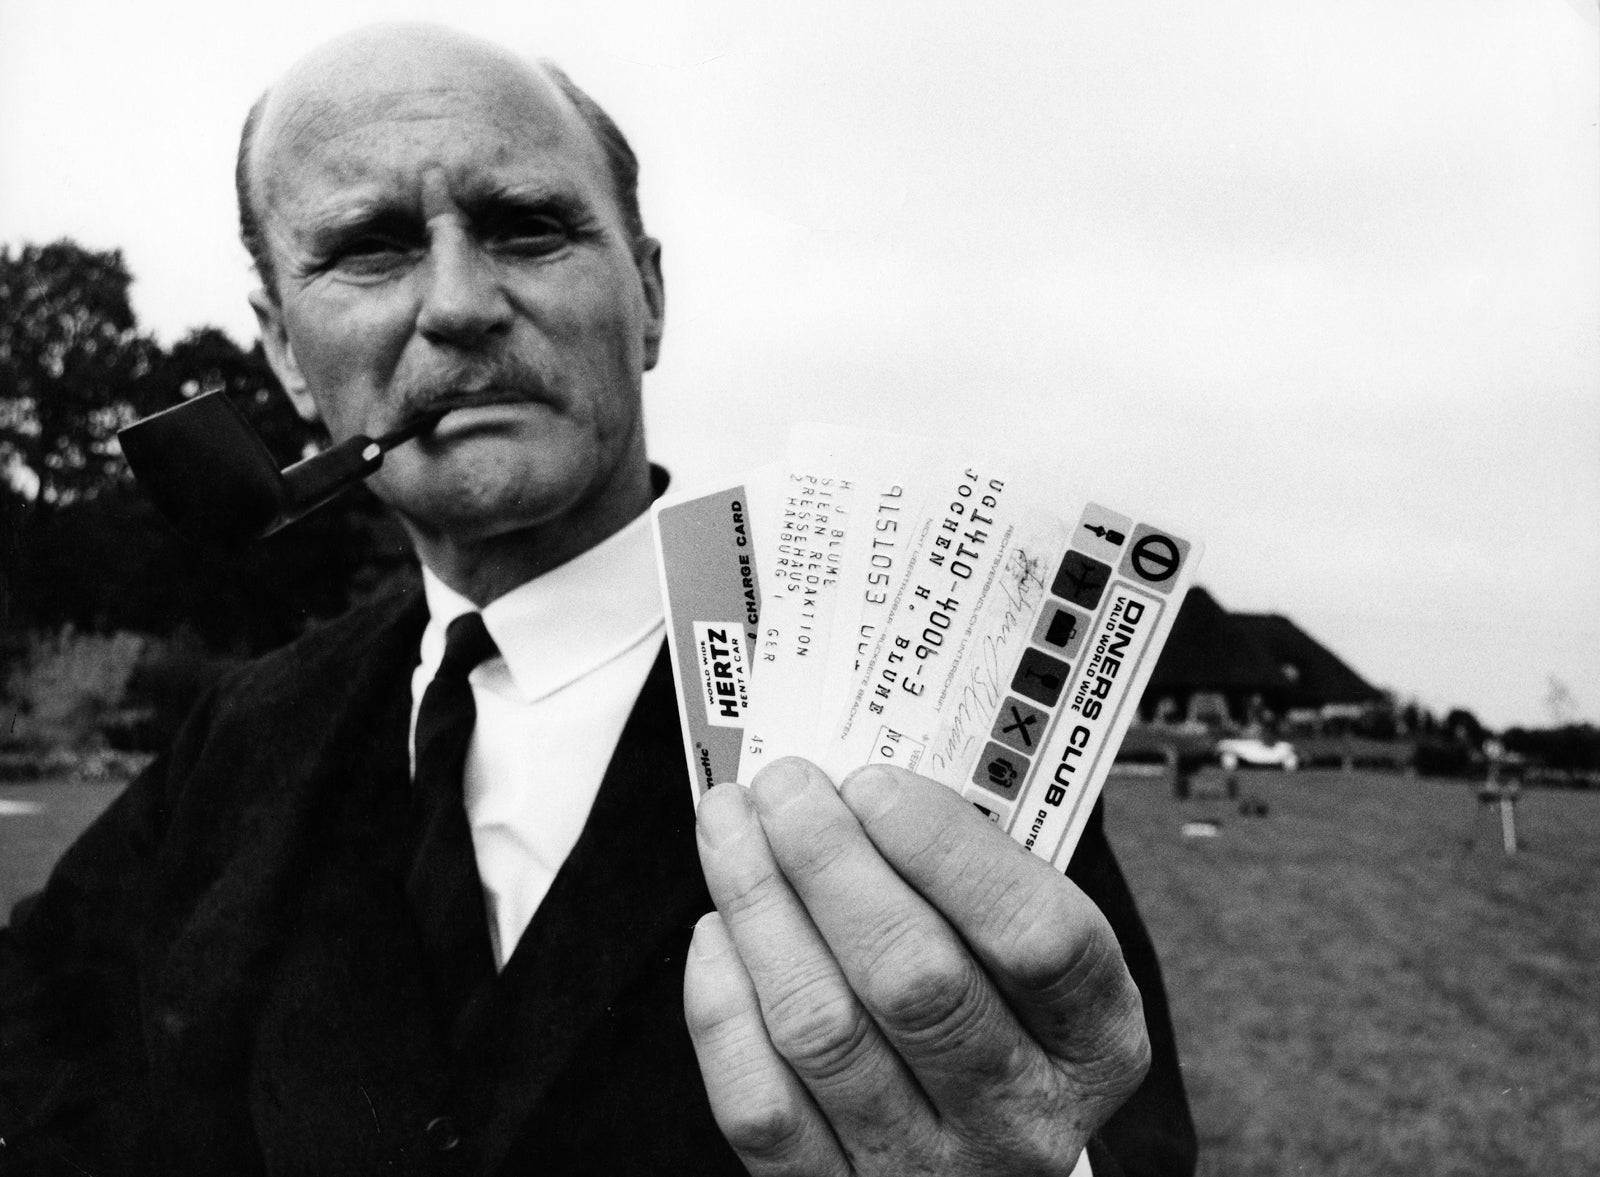 Federal Republic of Germany Man holding his Diners Club credit cards to the camera. - Photographer: Jochen Blume- undatedVintage property of ullstein bild